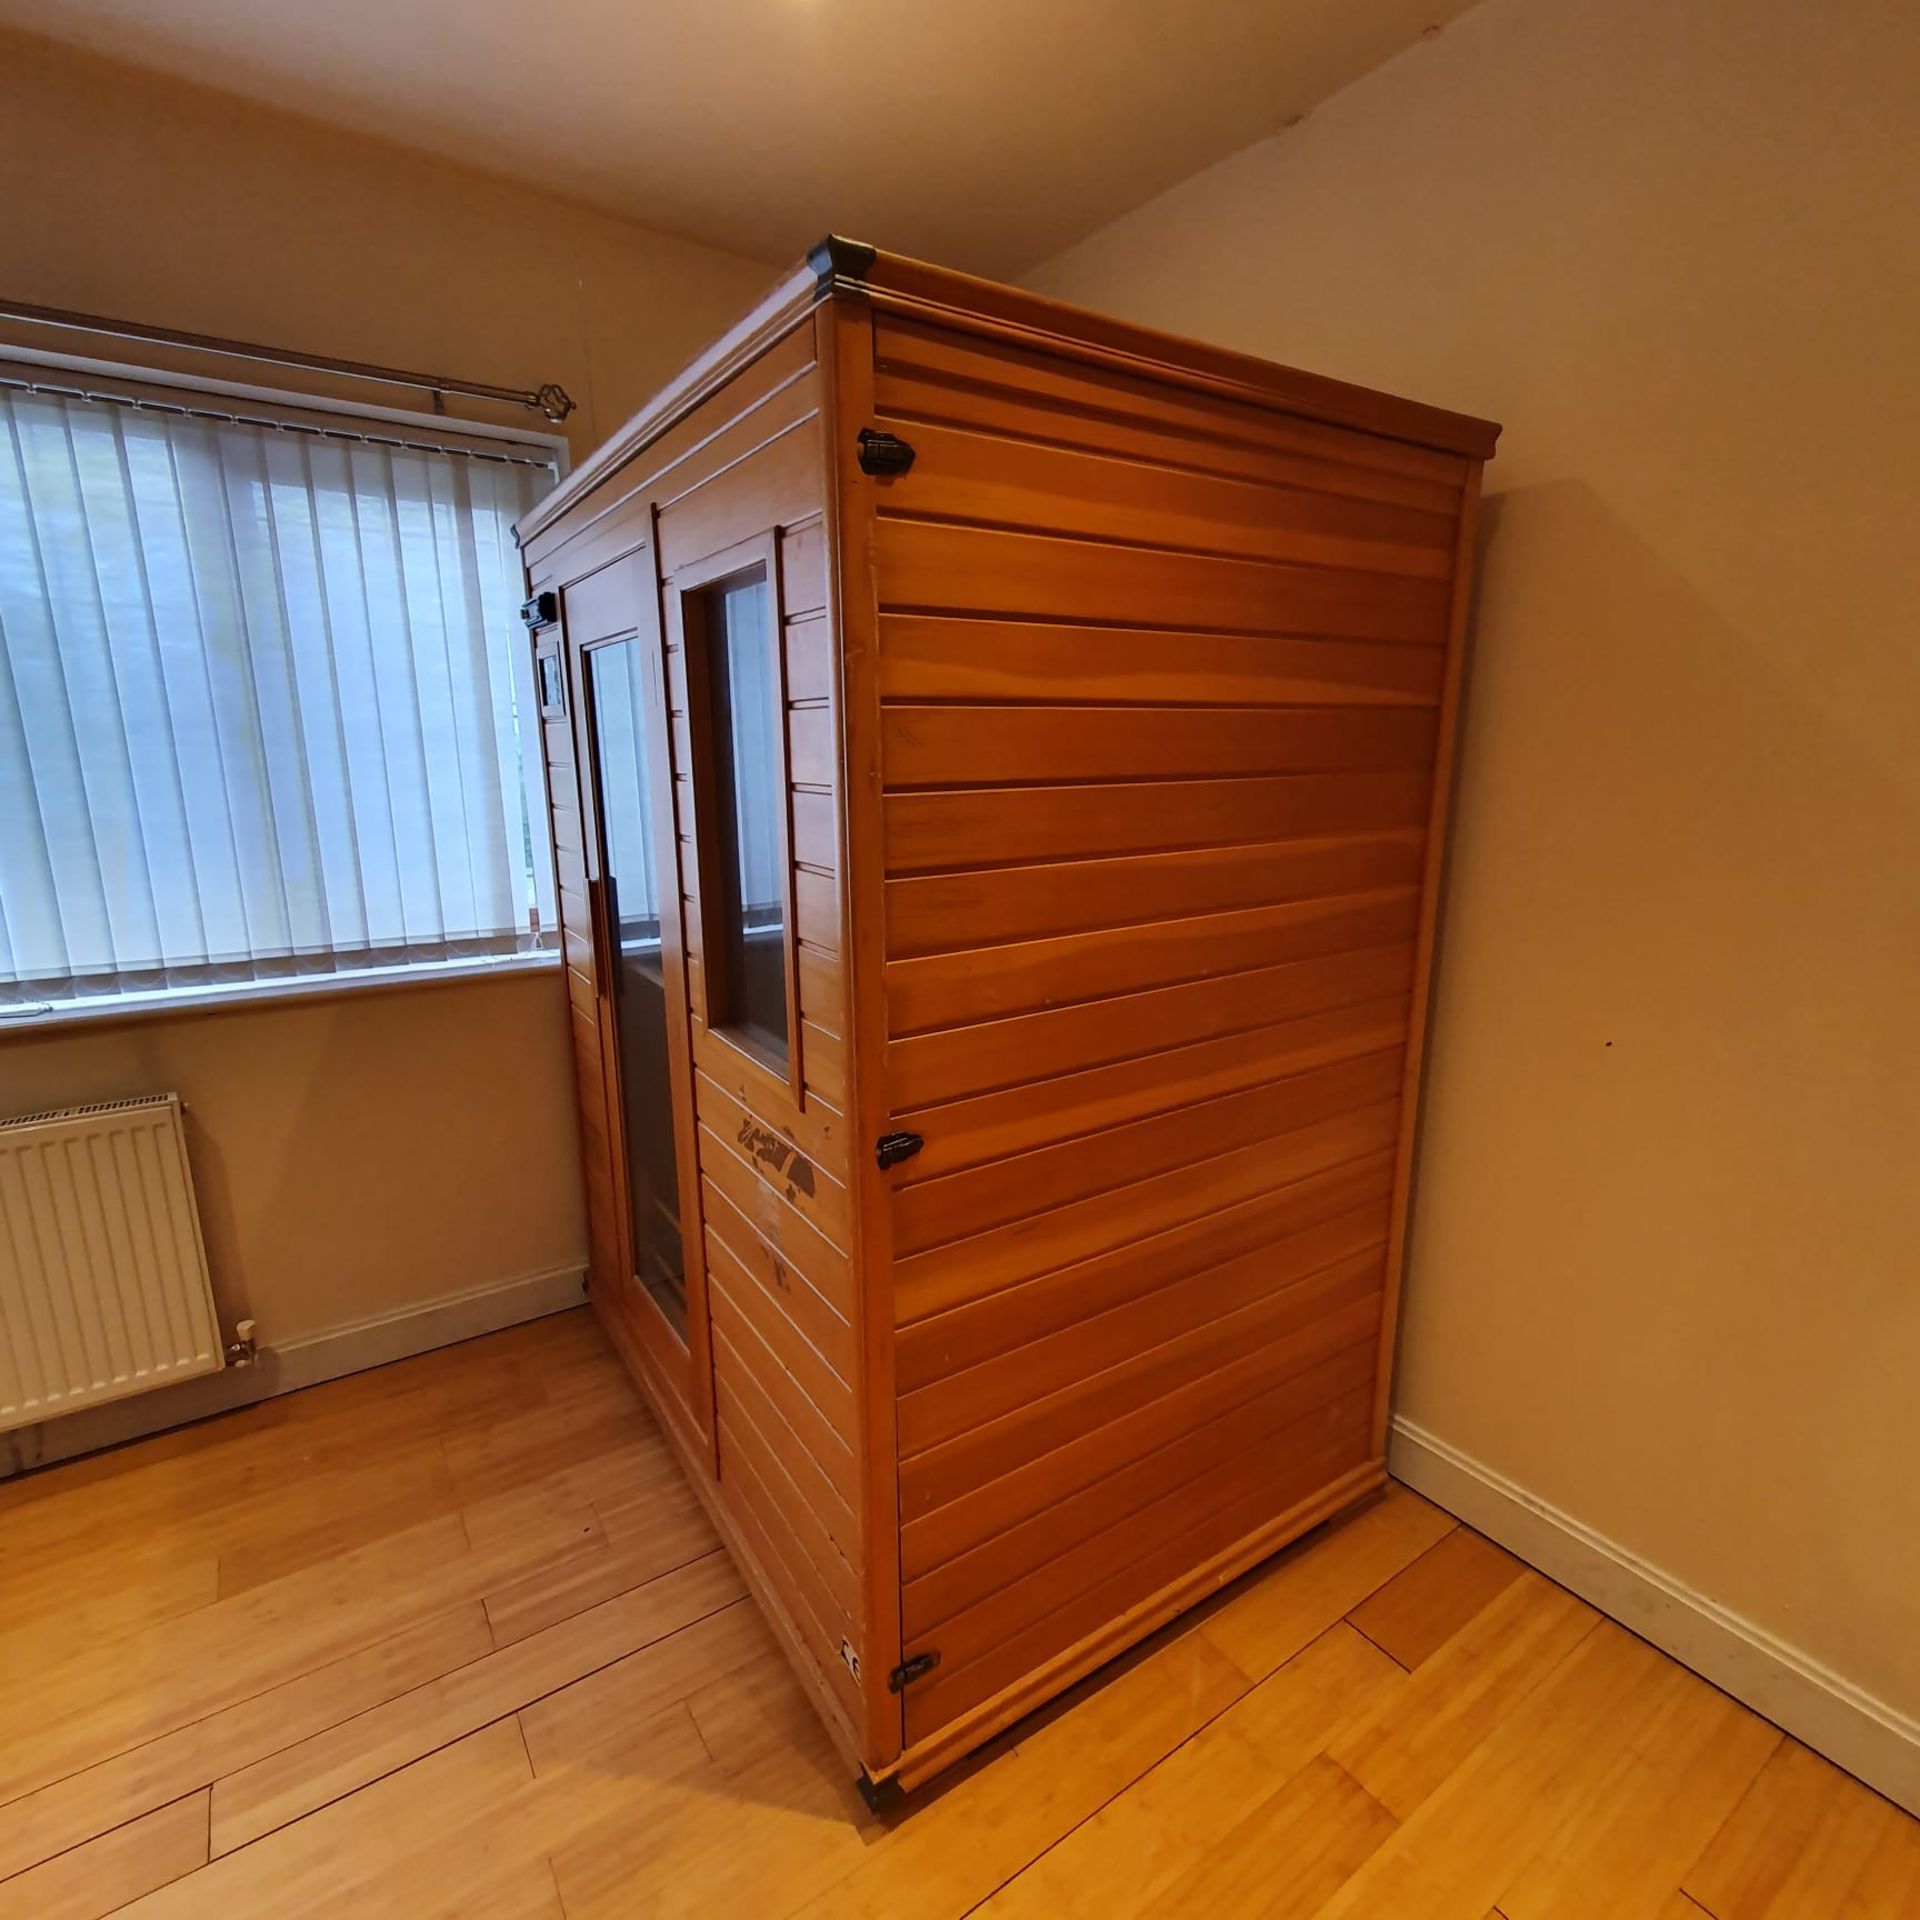 Infrared Sauna Room with Music System. Approx 1550mm Width, 1100mm Deep, 1900mm High. - Image 2 of 10